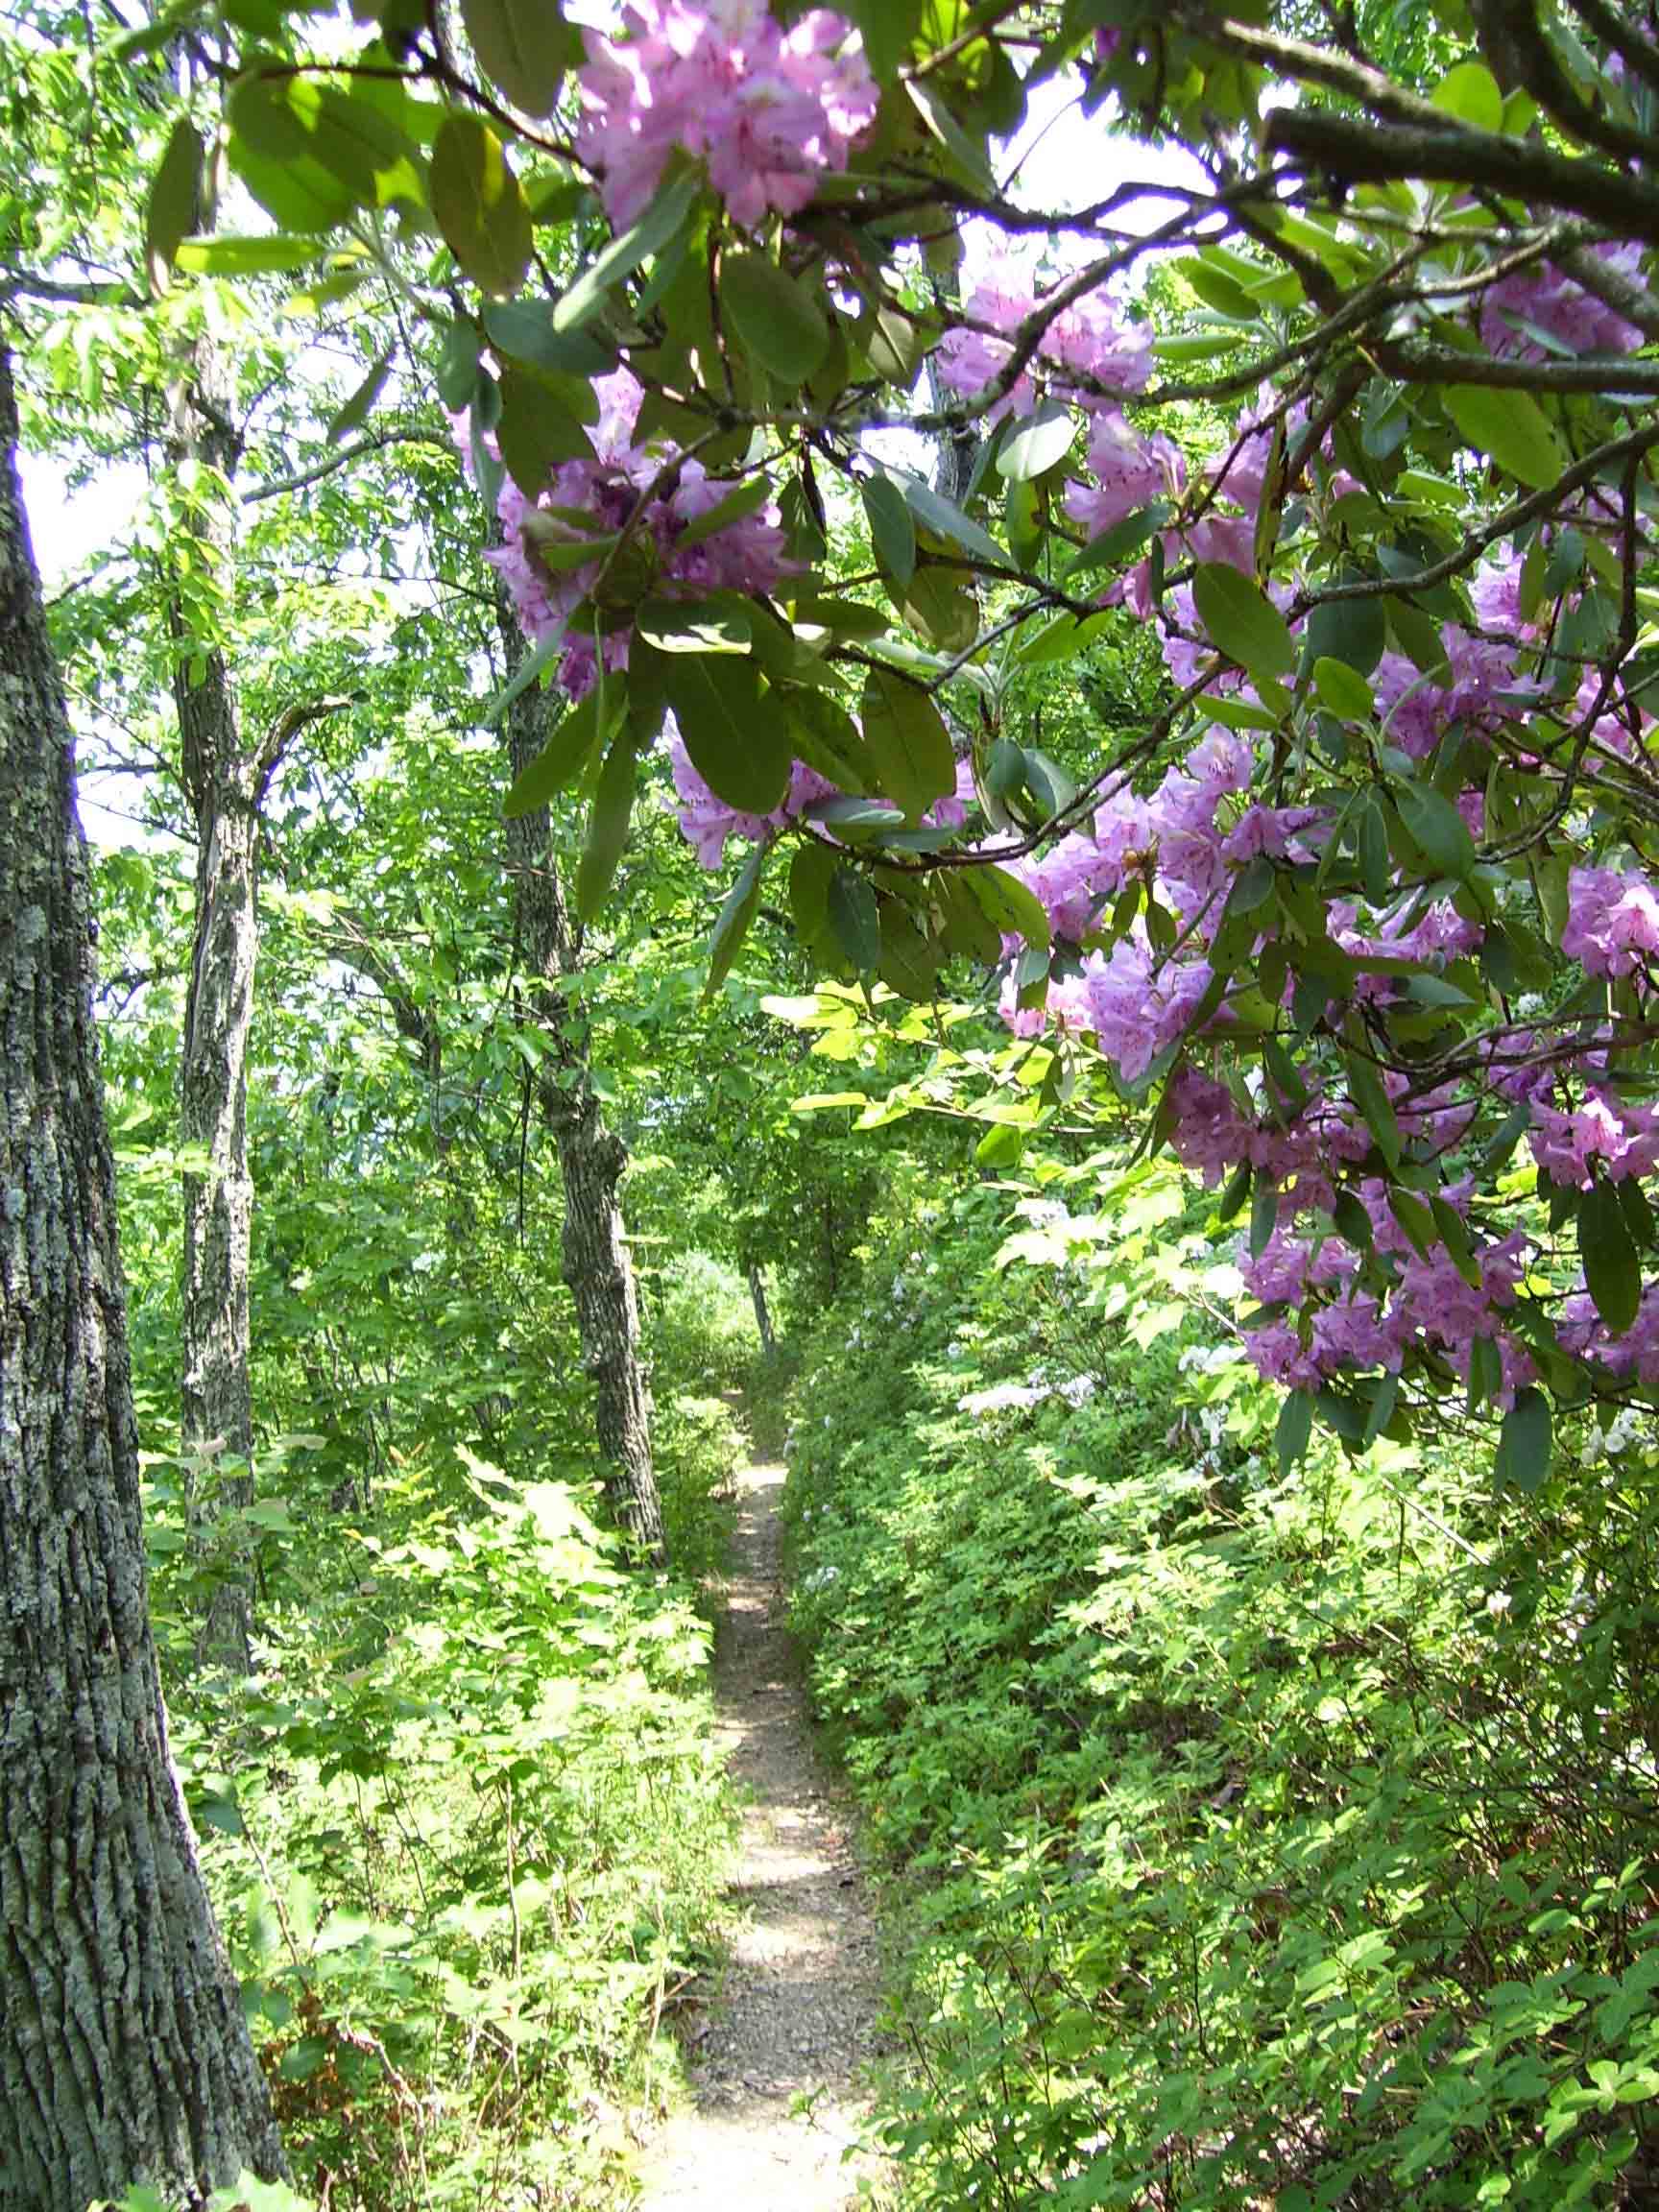 View along the trail in late May. Taken at approx. MM 4.5.  Courtesy dlcul@conncoll.edu